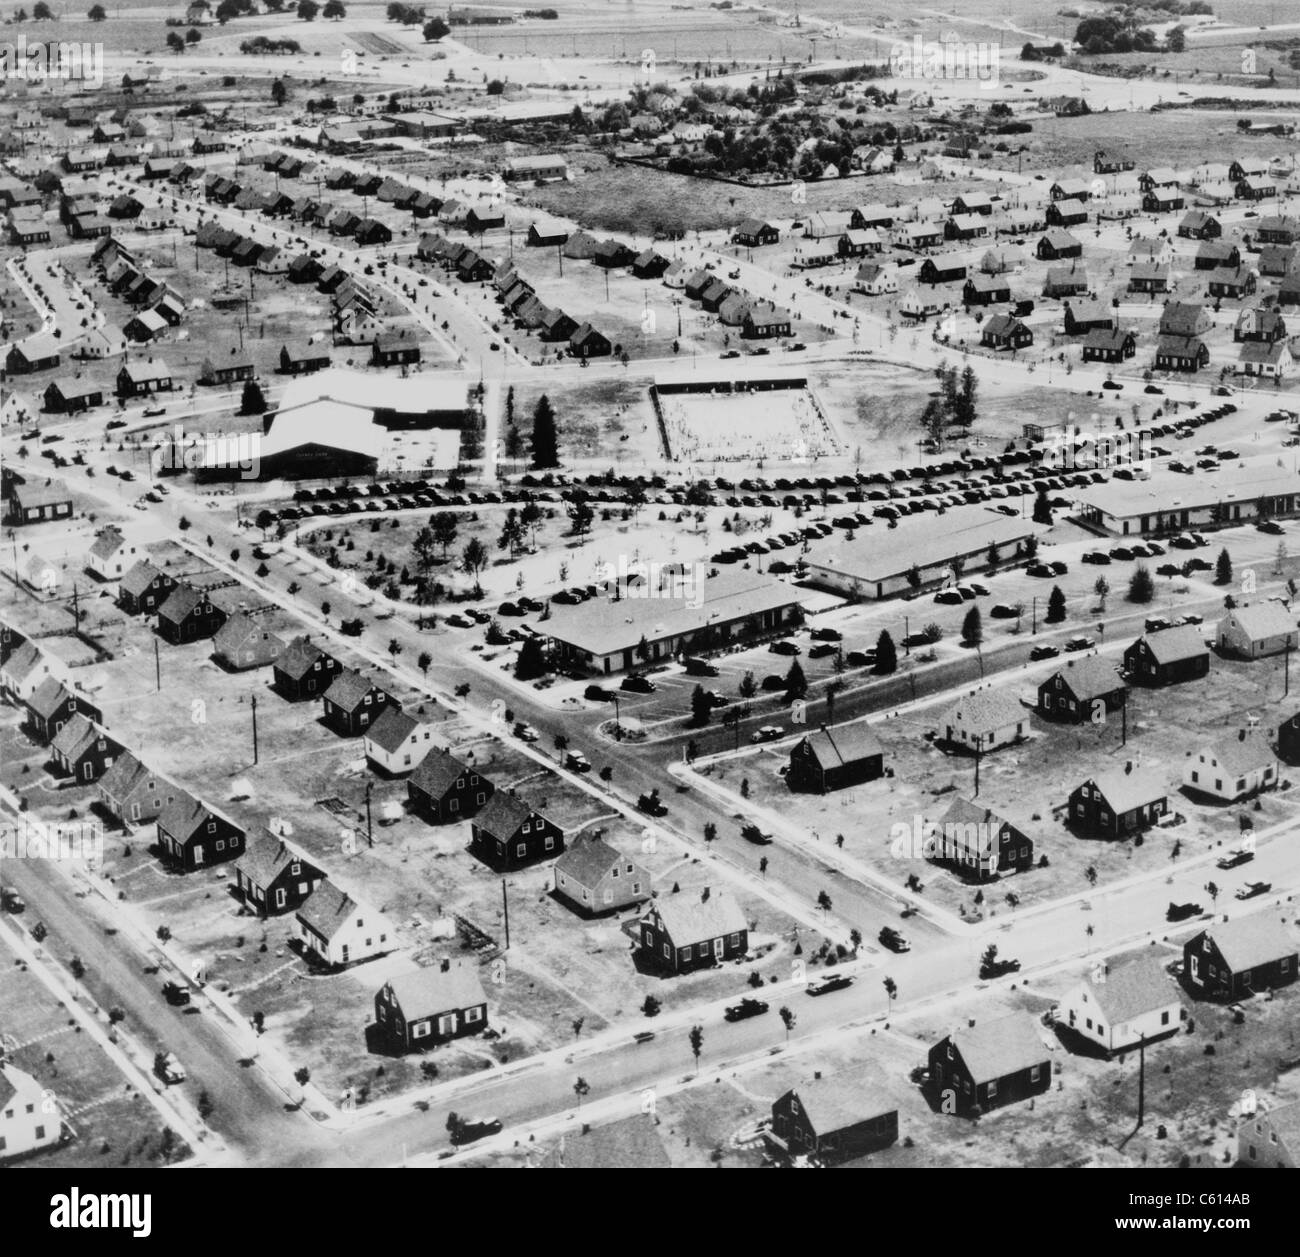 Aerial view of Levittown New York in 1953. Levittown was named after William Levitt the builder of the planned suburban community on Long Island New York. Ca. 1950. (BSLOC 2010 18 92) Stock Photo